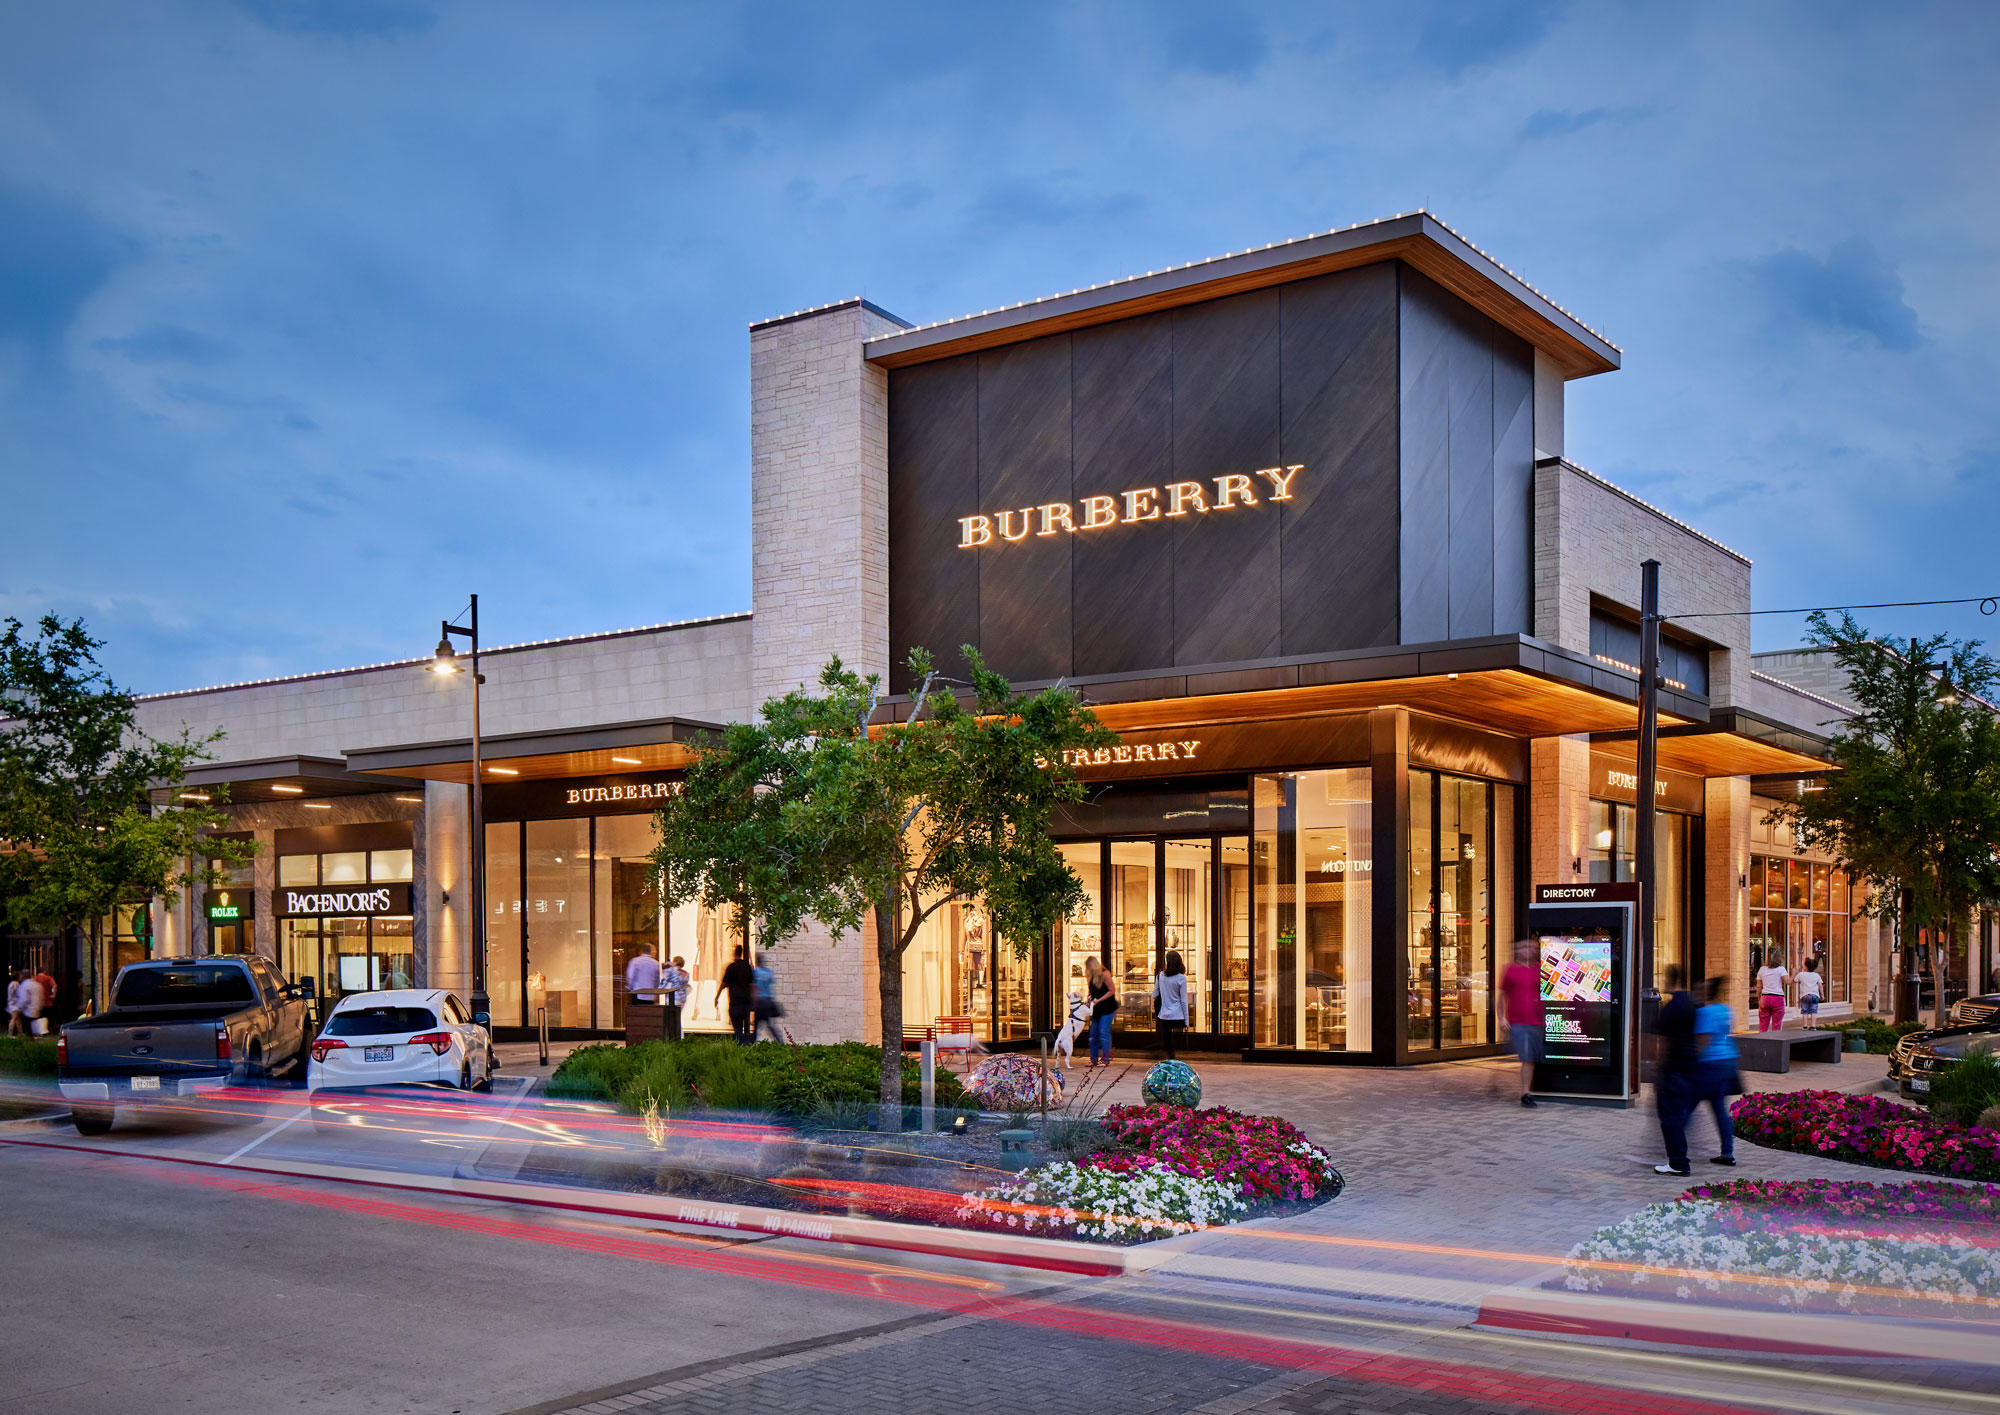 Louis Vuitton, Burberry, Tiffany to open stores at Clearfork